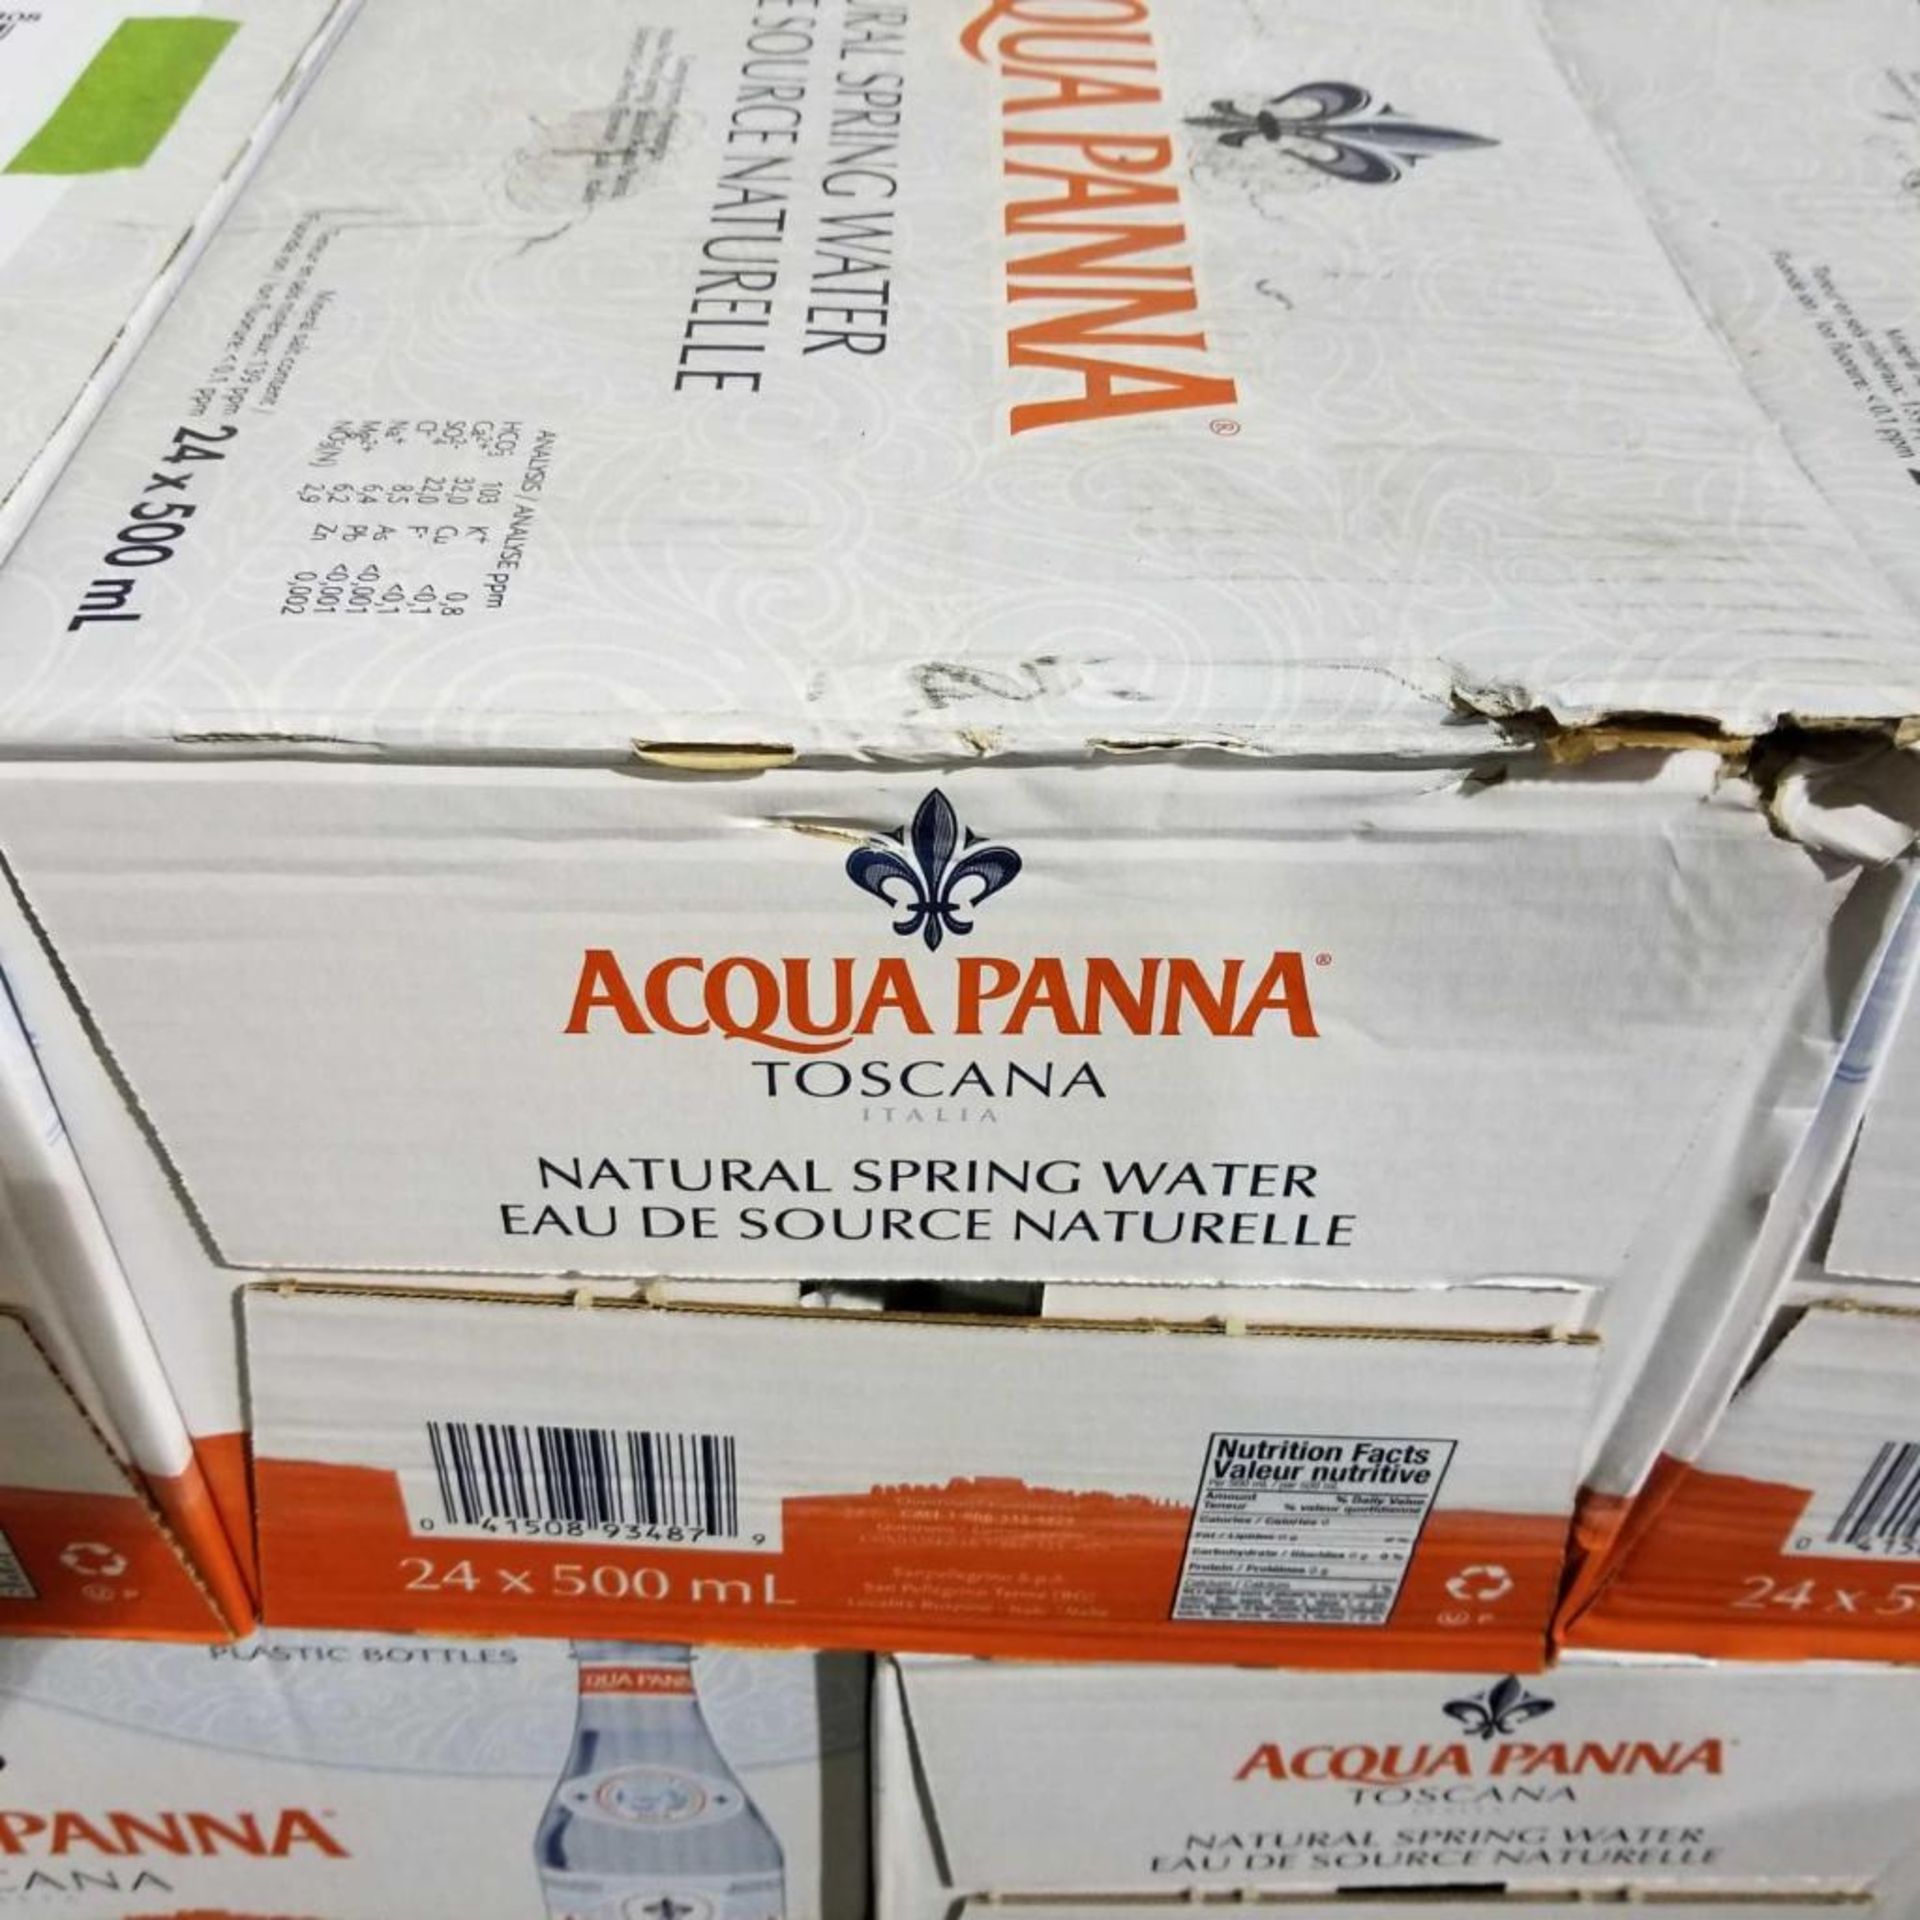 Case of 24 x 500 mL Acqua Panna Natural Spring water